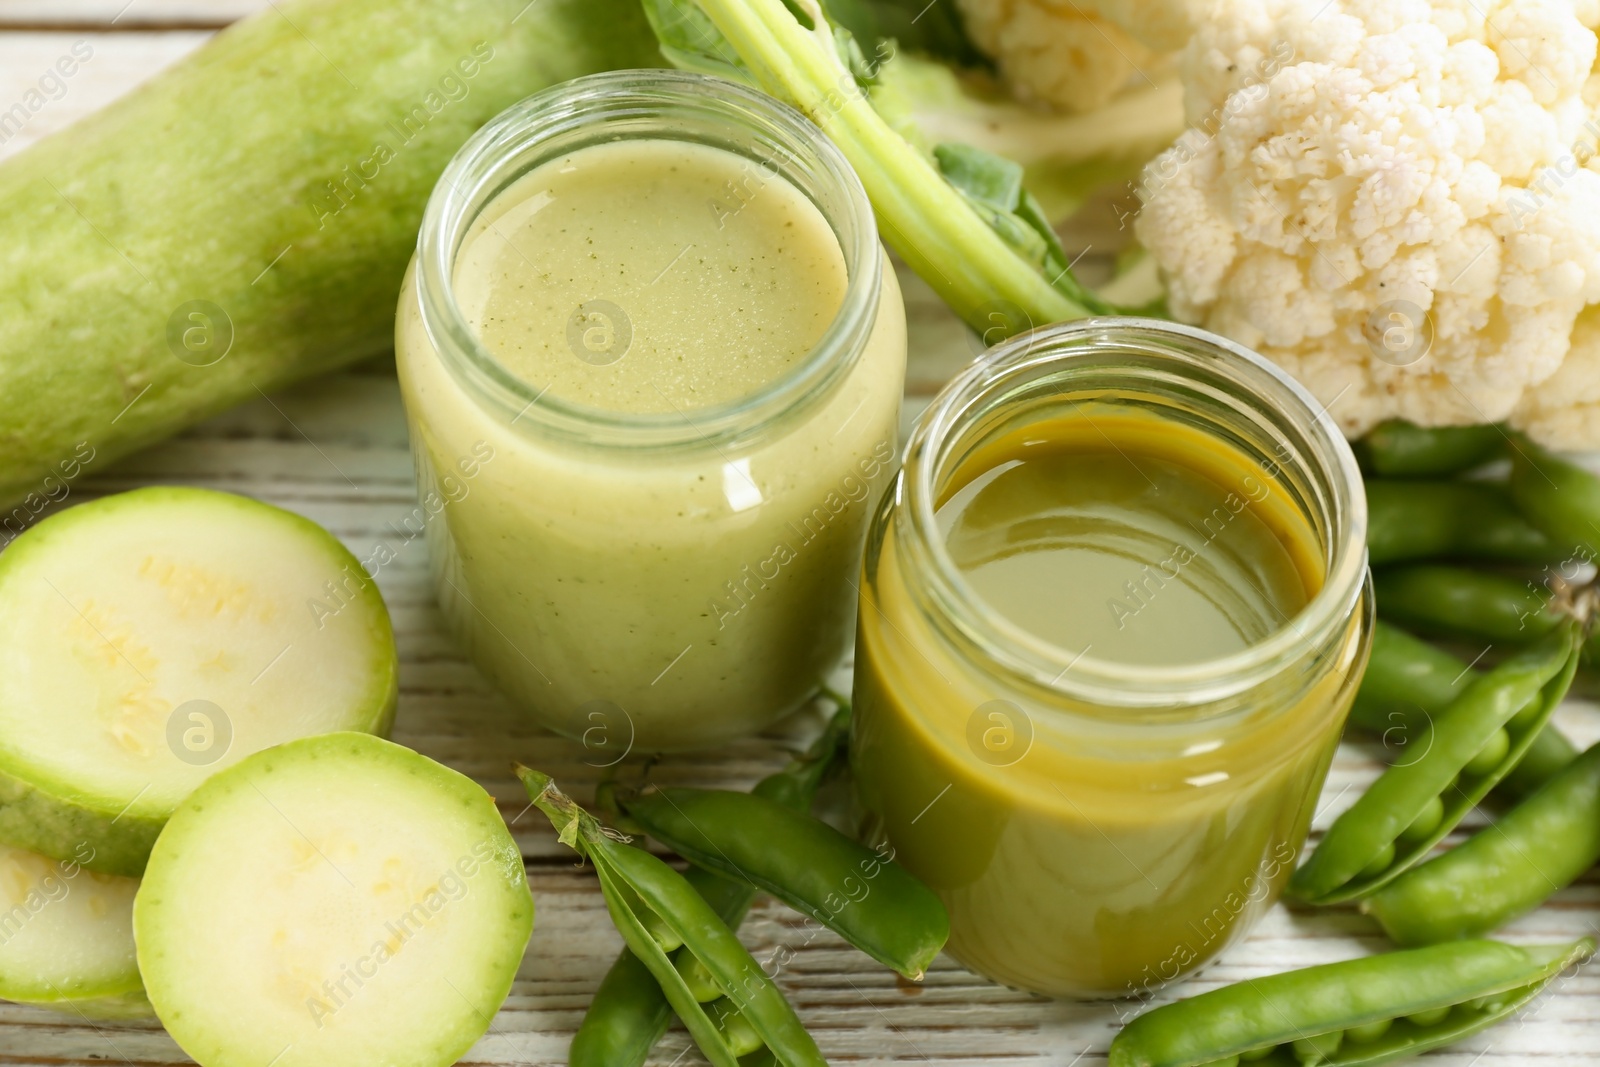 Photo of Jars with healthy baby food and ingredients on table